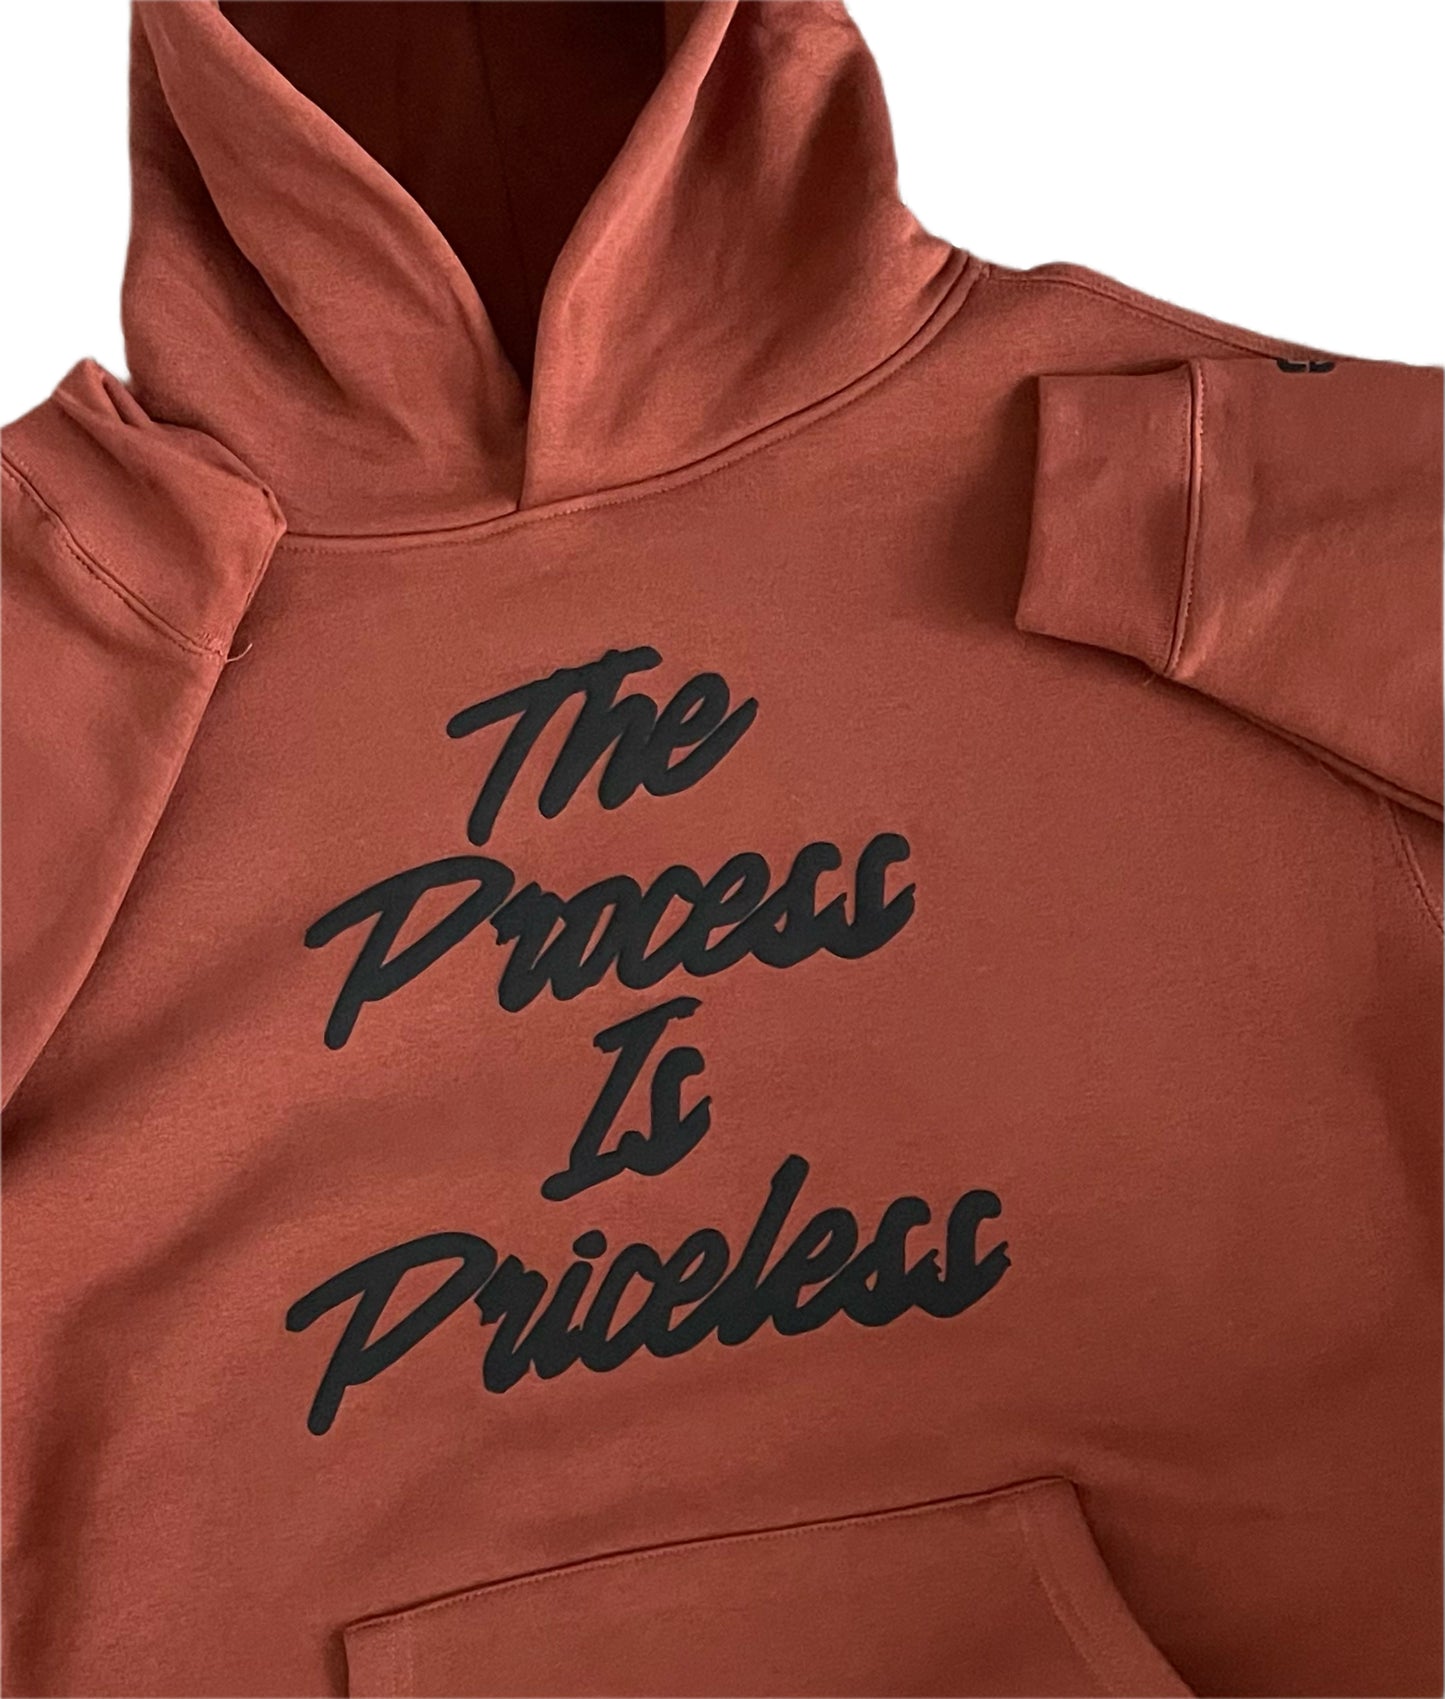 THE PROCESS IS PRICELESS HOODIE